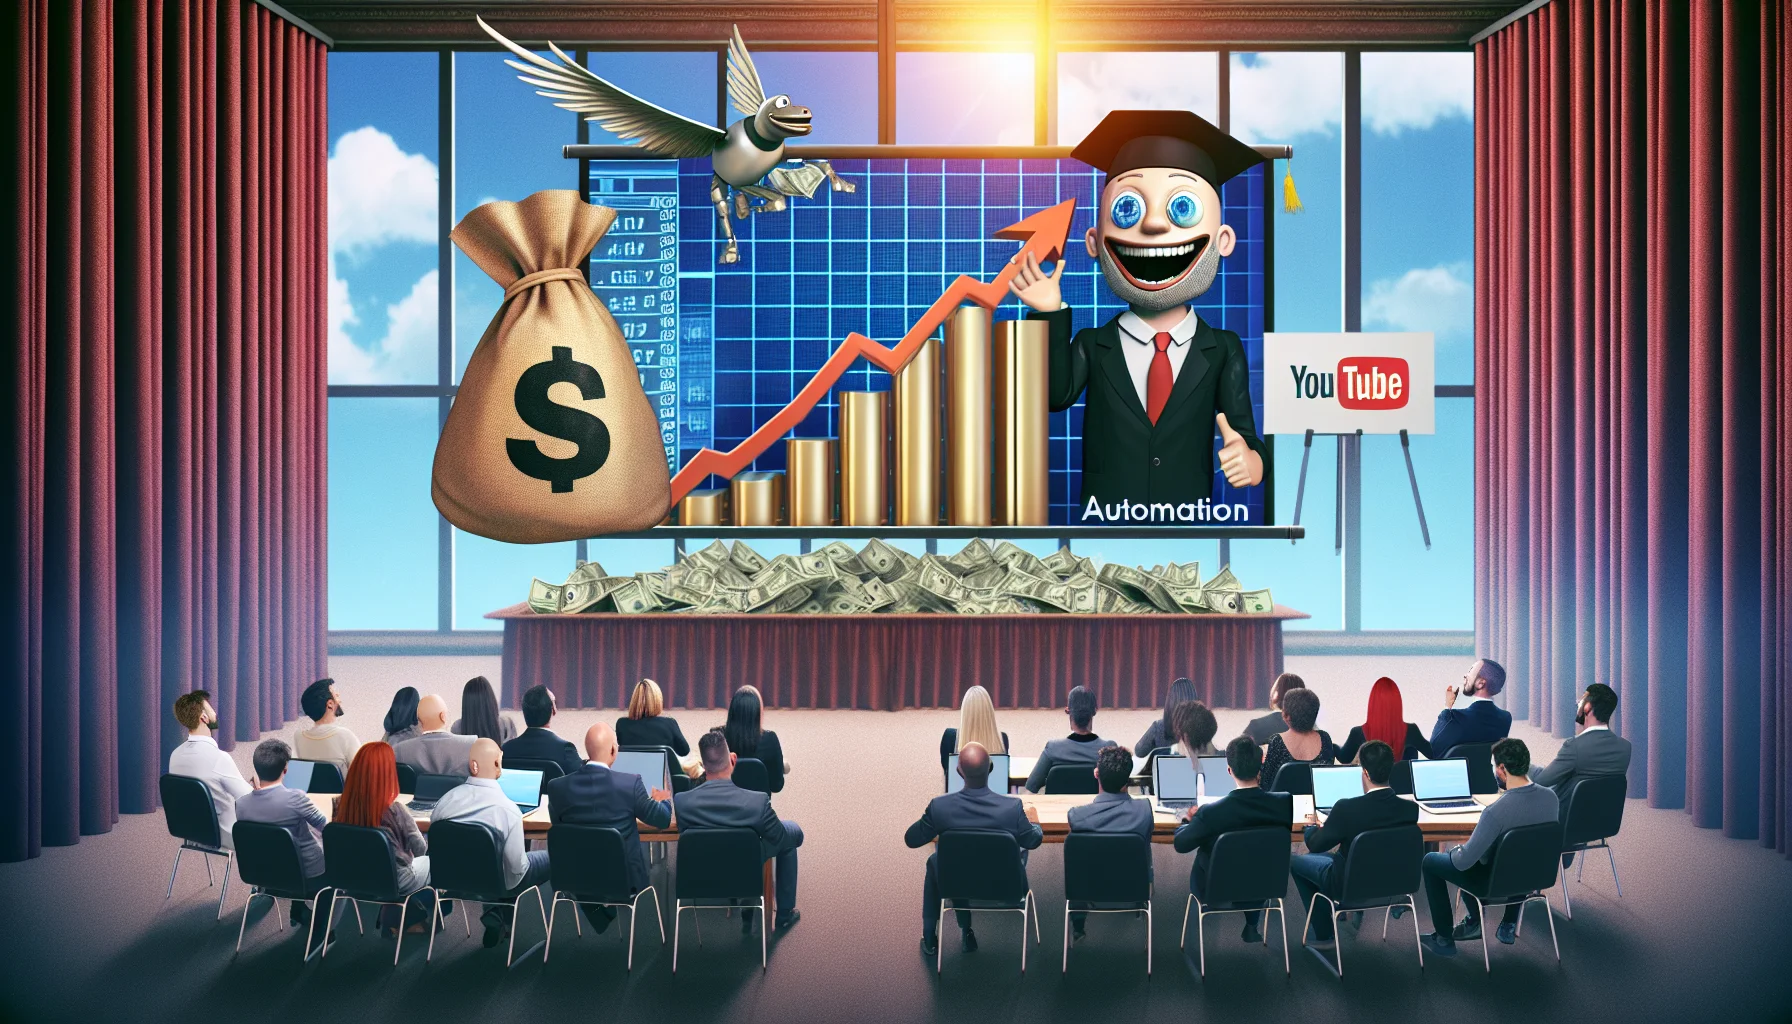 Create a humorous and realistic image representing an online business automation summit. It's set in a virtual conference room filled with people from diverse descents and genders. The main screen is sharing a graph with an upward trend, symbolizing the growth in online earnings facilitated by the automation techniques discussed. Hovering beside the screen is a caricature of a money bag with wings, adding to the jovial ambiance. In the corner of the image, a YouTube logo subtly suggests the platform where this summit takes place.